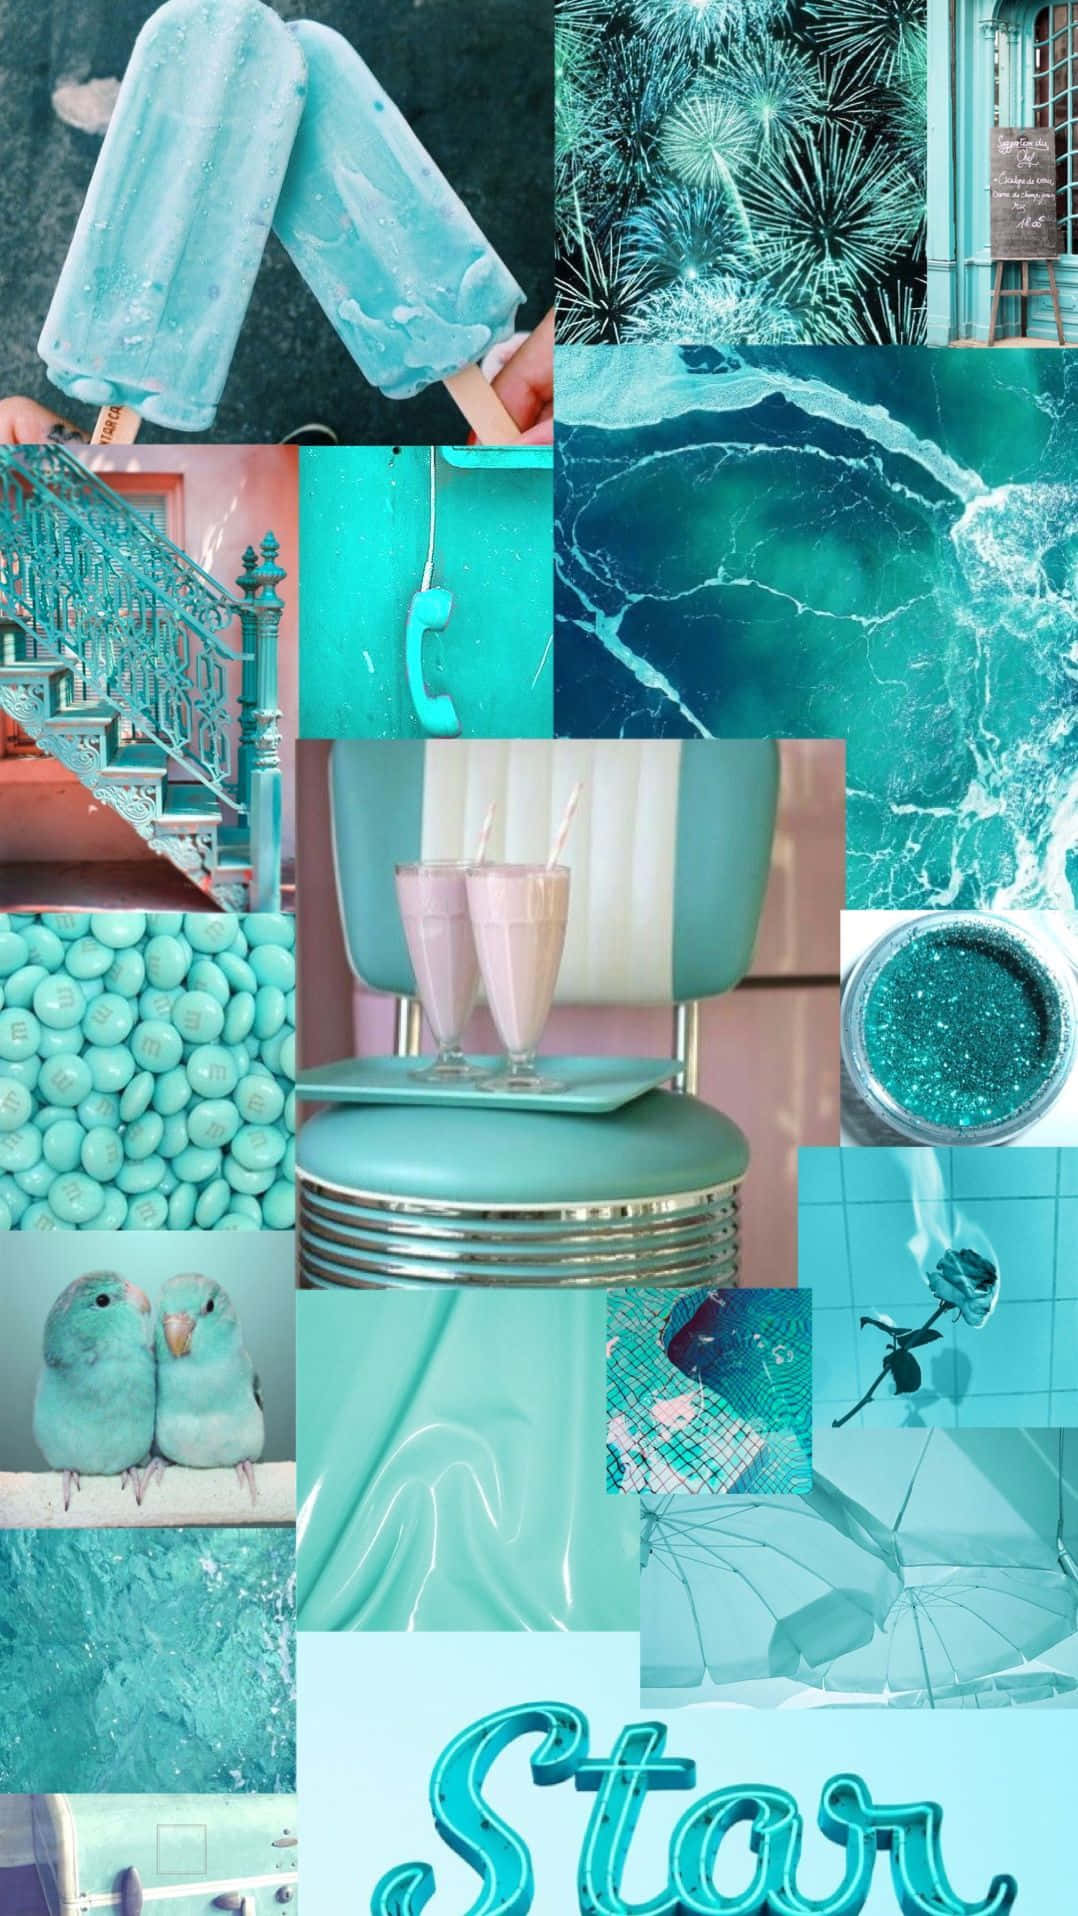 Bring a splash of color and style to your space with the vibrant turquoise aesthetic. Wallpaper